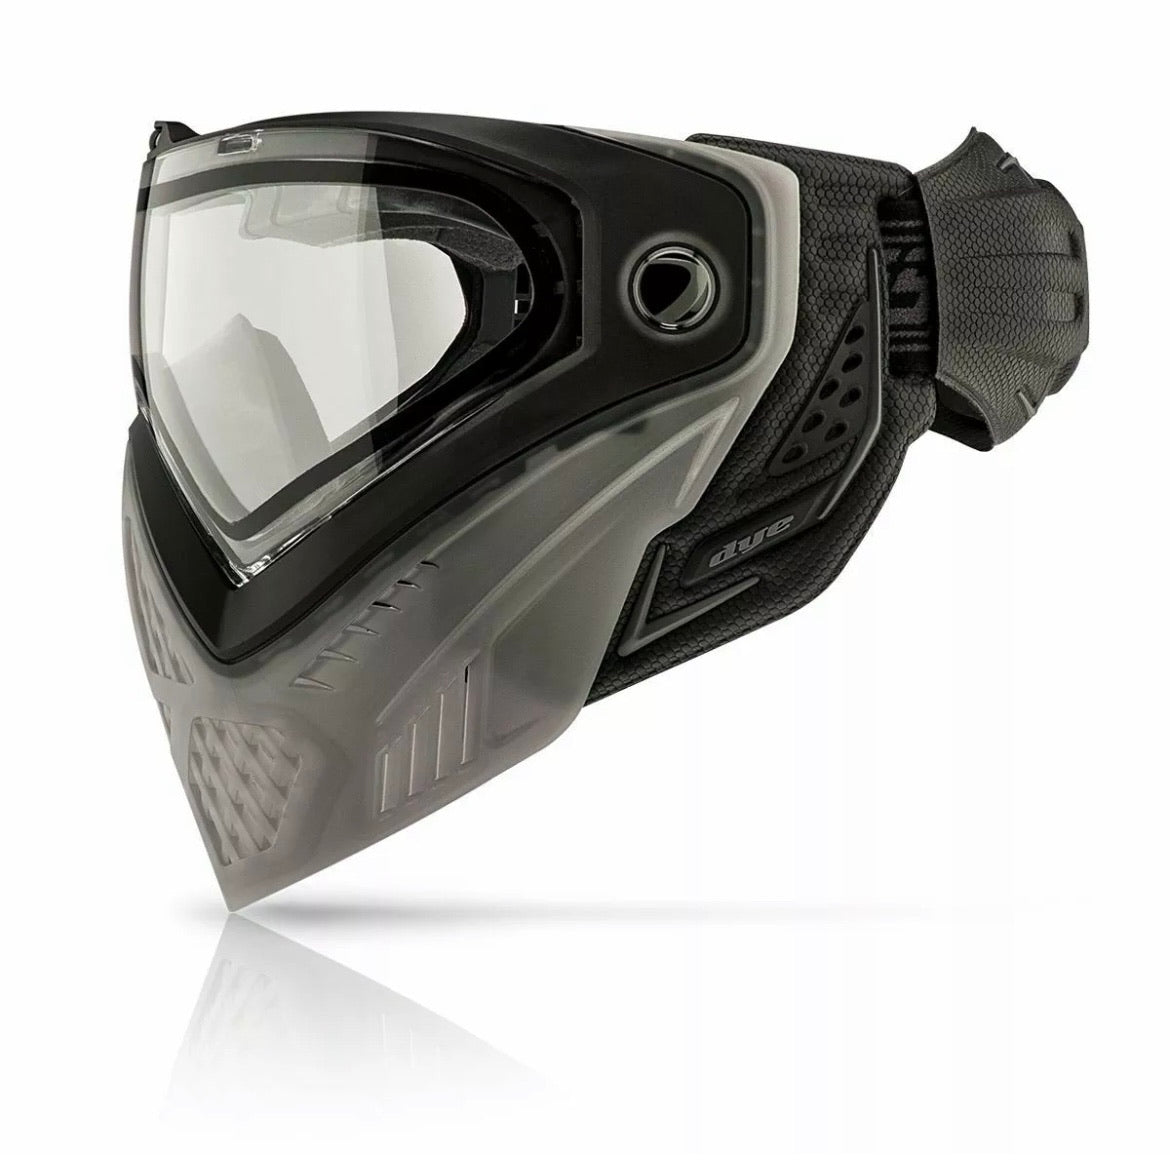 ONLINE ONLY - Dye i5 Goggle Mask